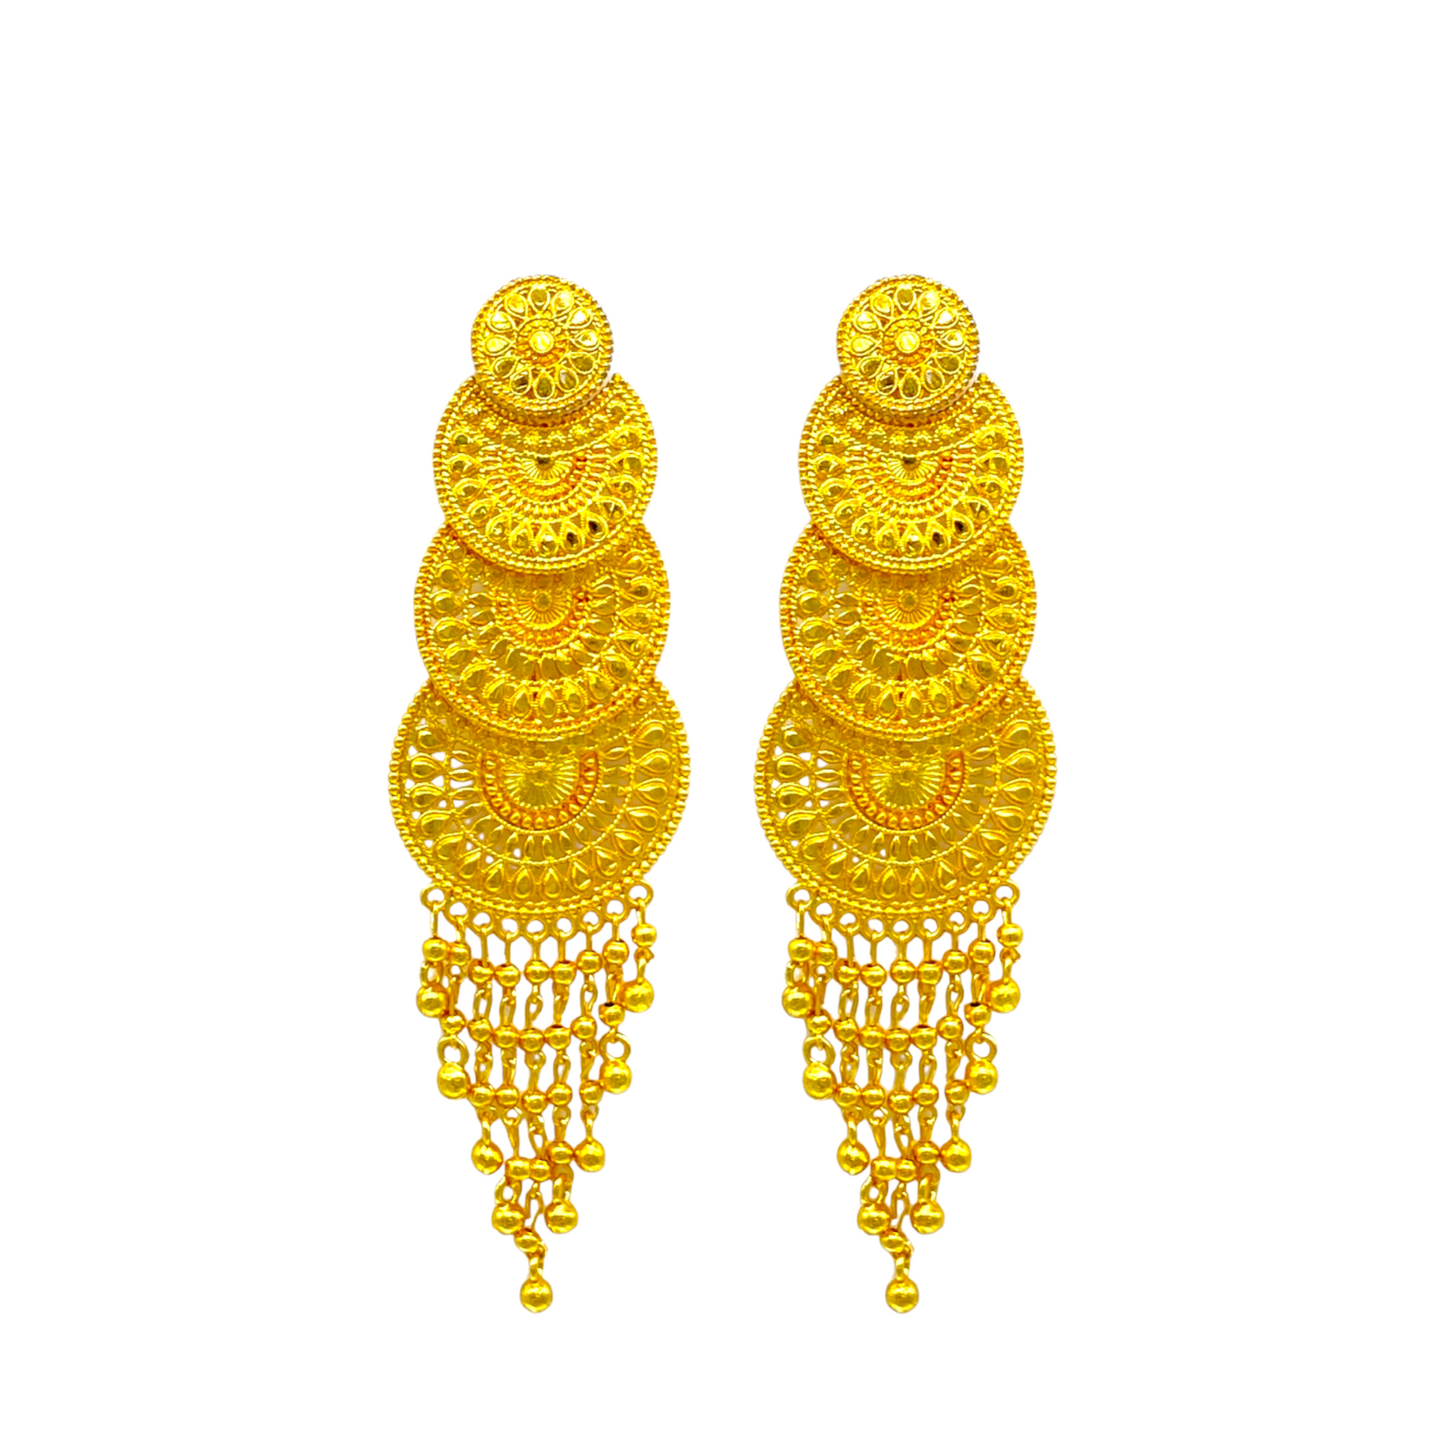 Gold Layered Earrings with gold beads tassel